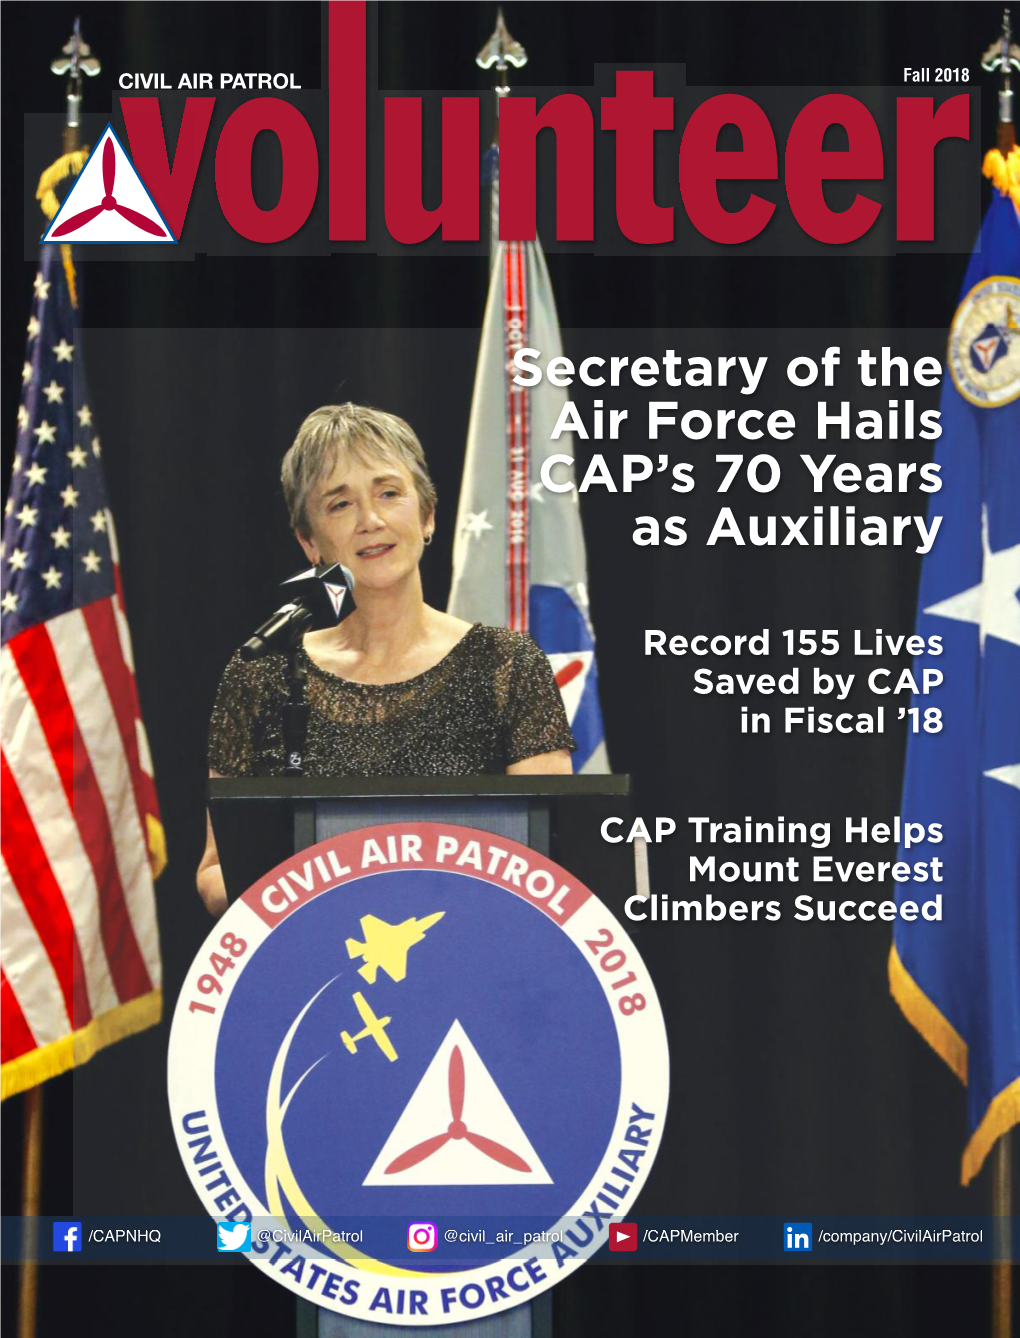 Secretary of the Air Force Hails CAP's 70 Years As Auxiliary